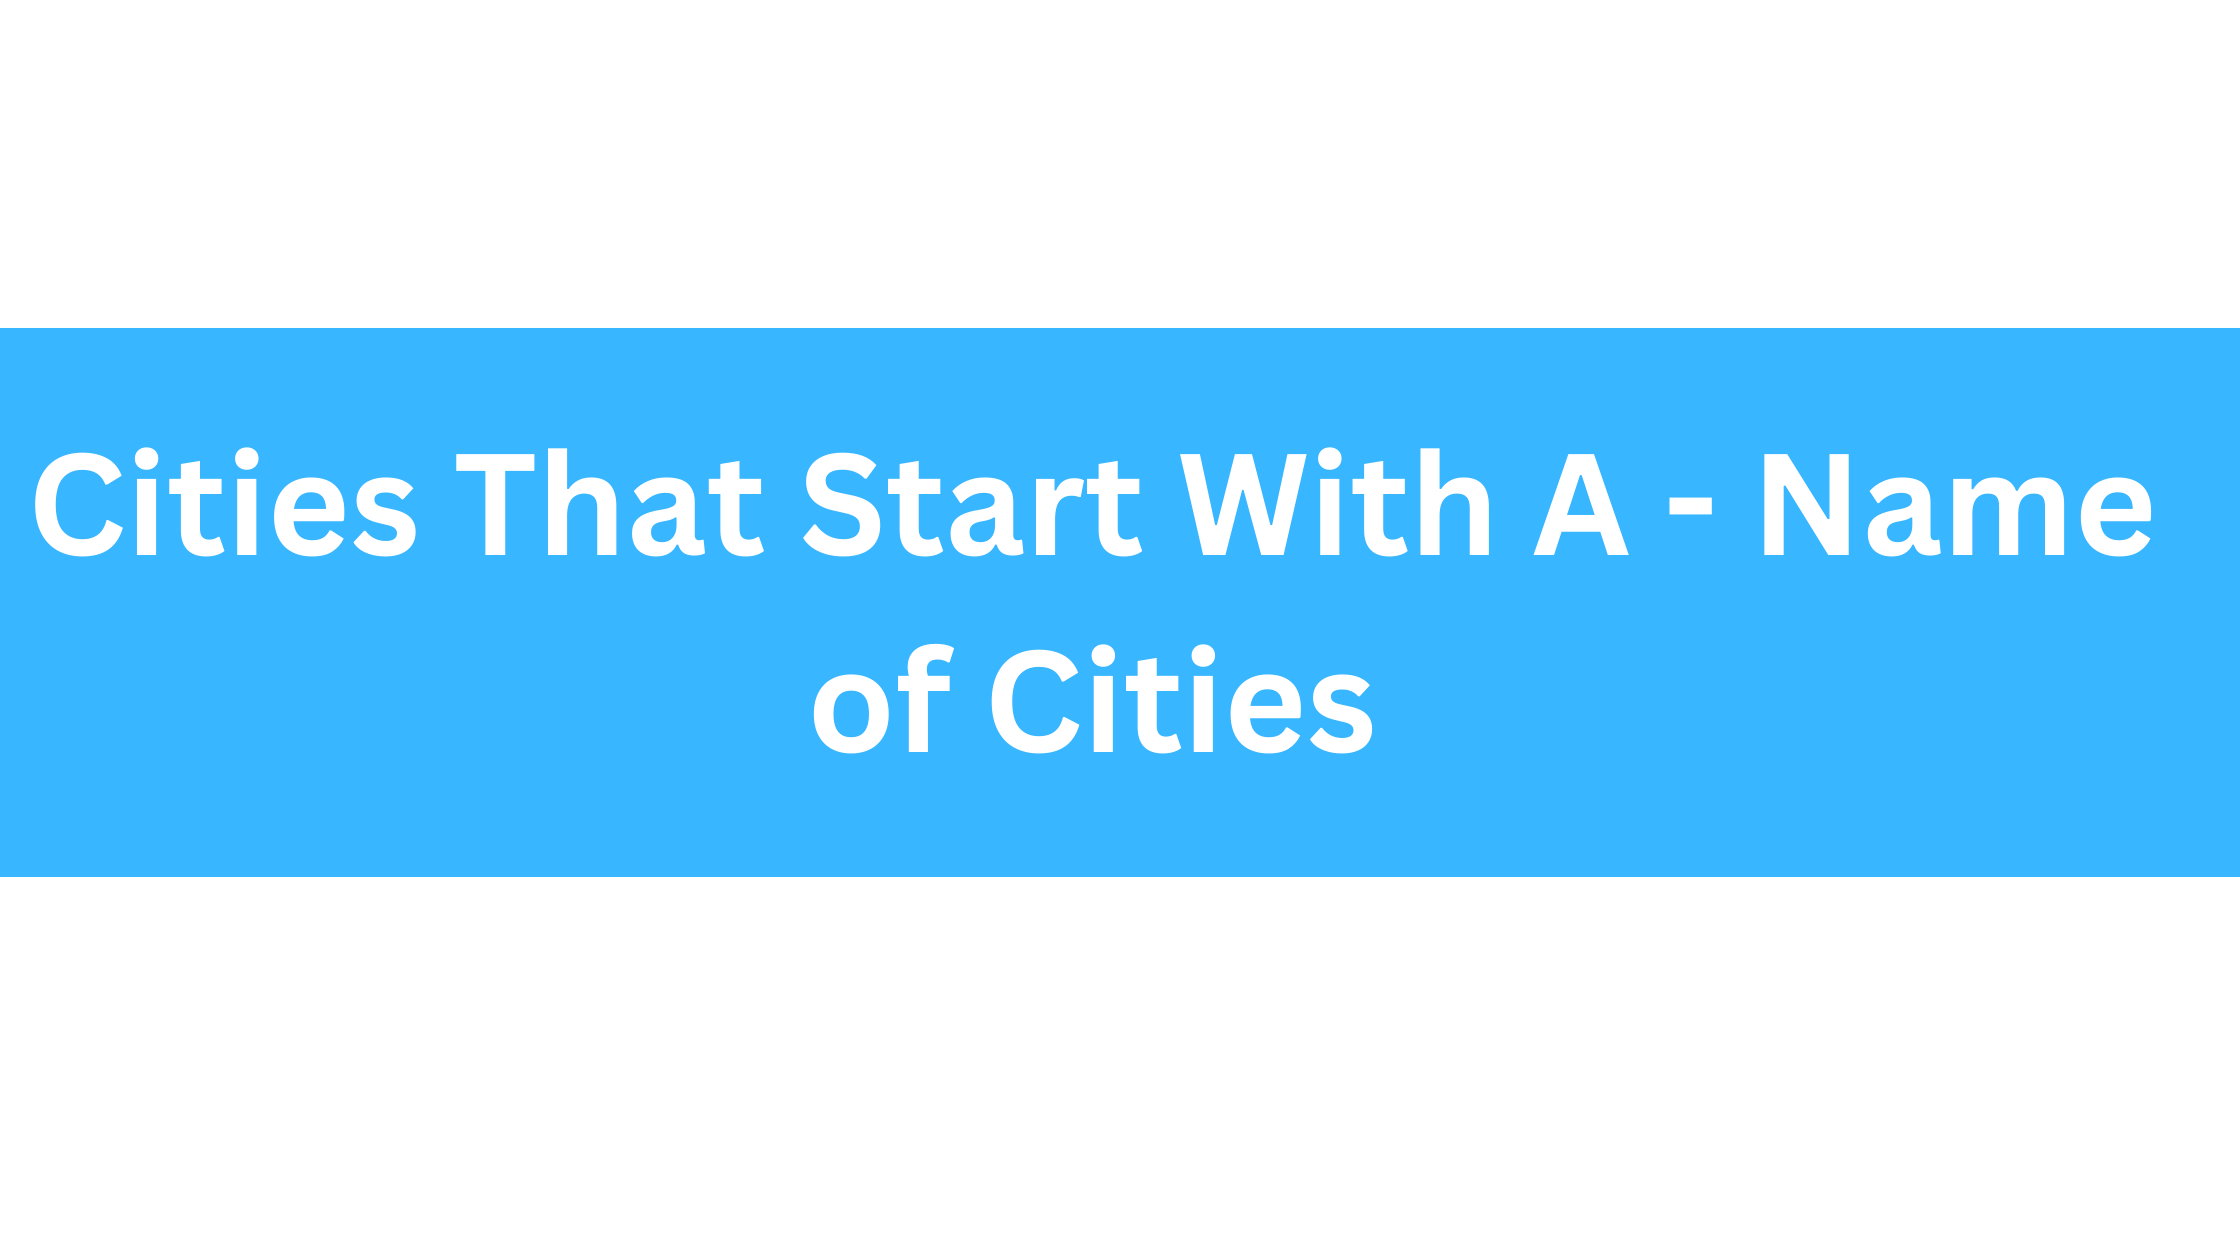 Cities That Start With A